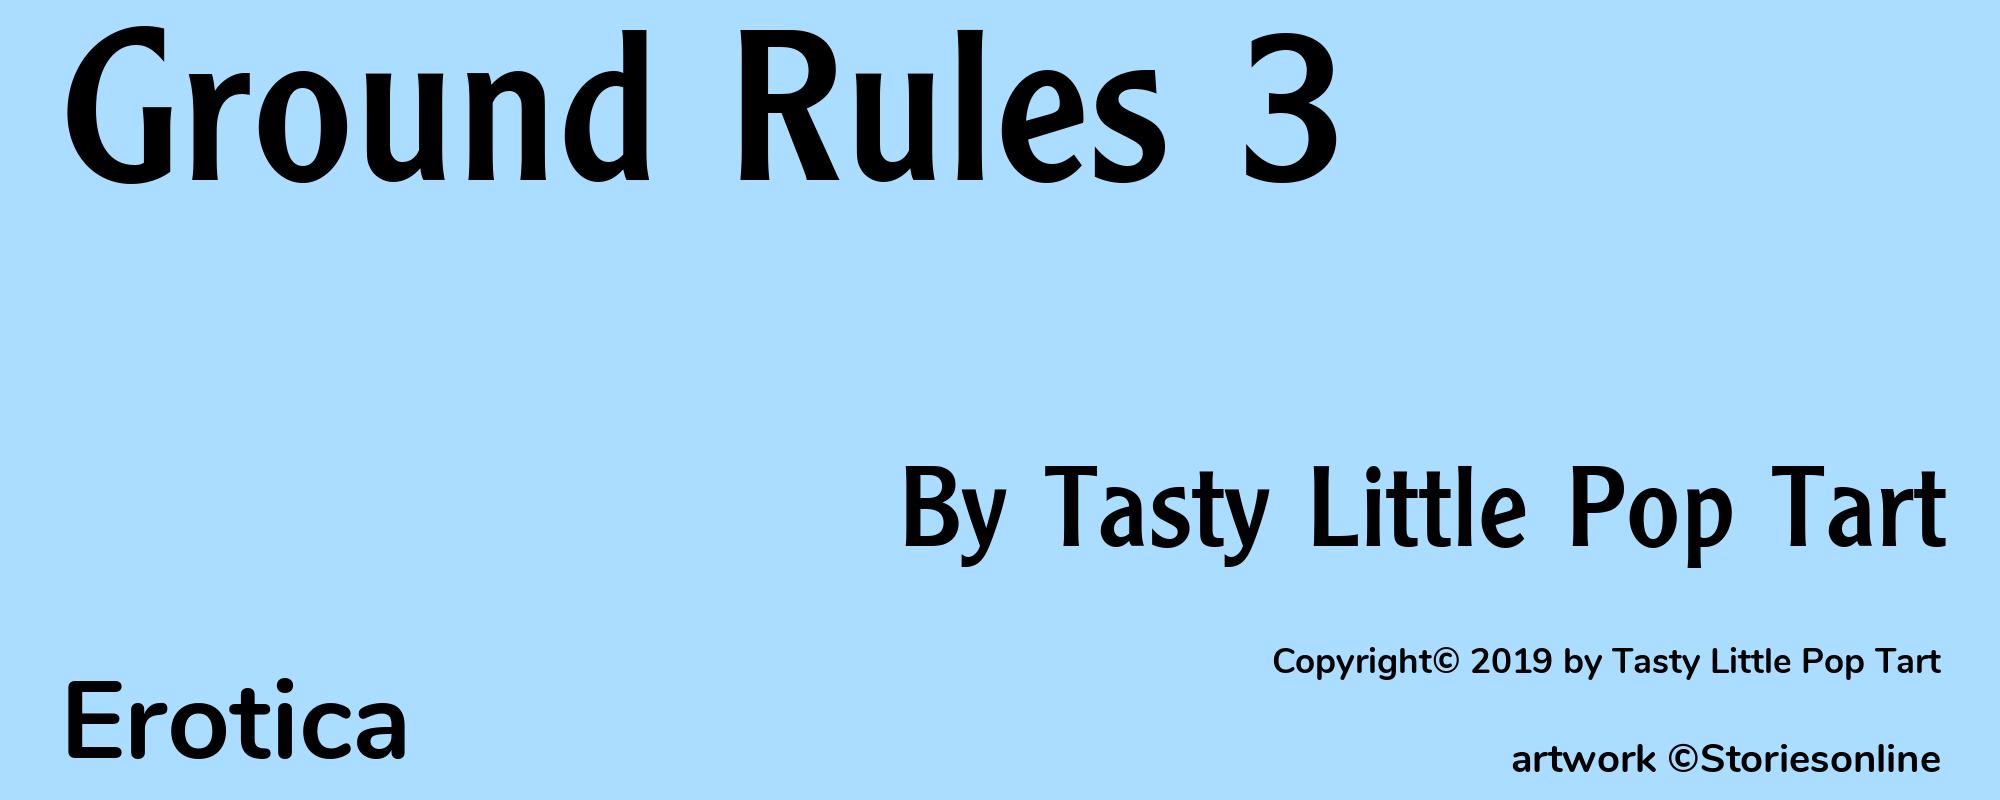 Ground Rules 3 - Cover